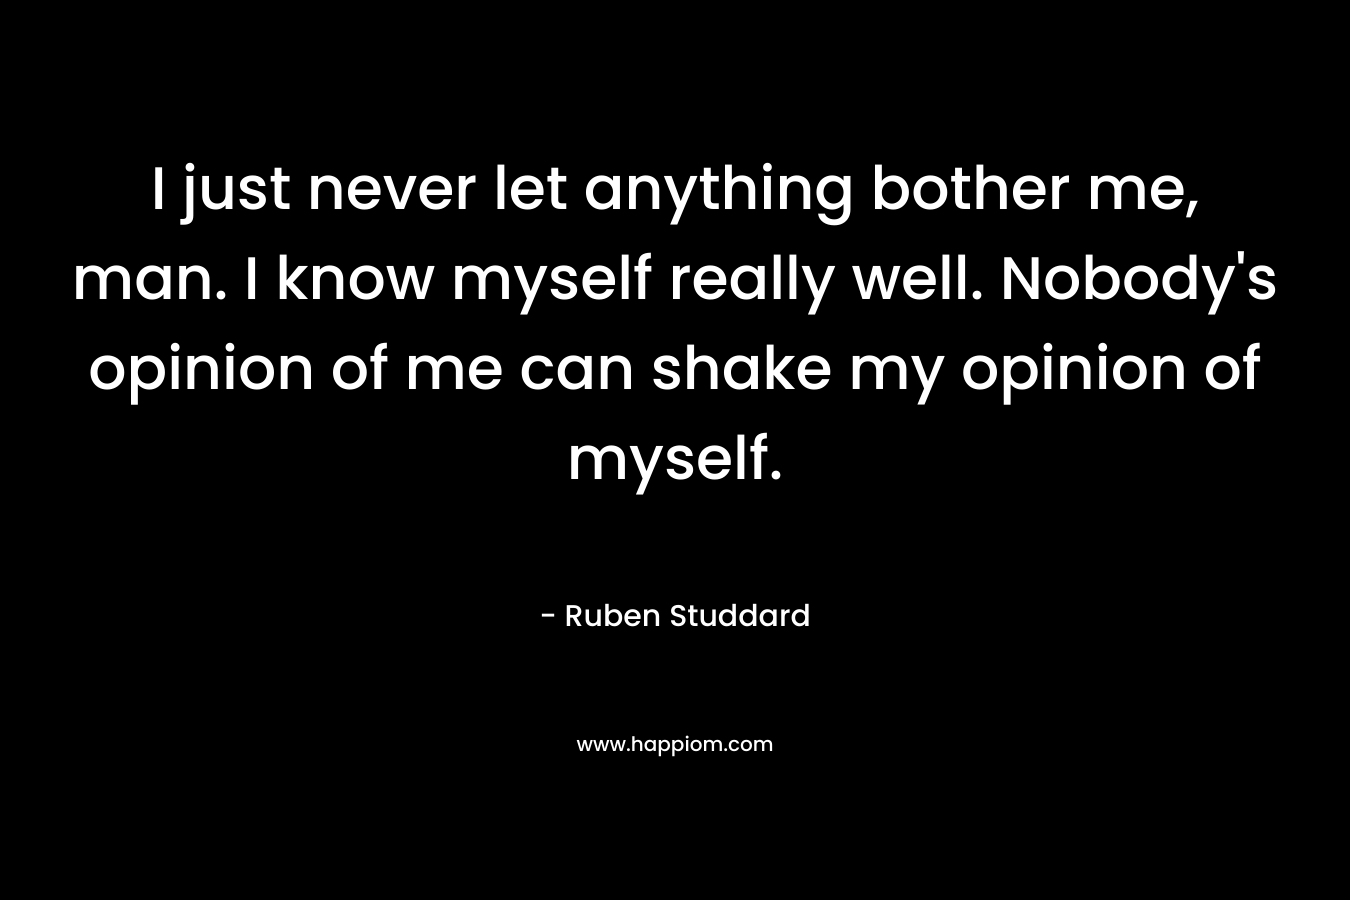 I just never let anything bother me, man. I know myself really well. Nobody’s opinion of me can shake my opinion of myself. – Ruben Studdard